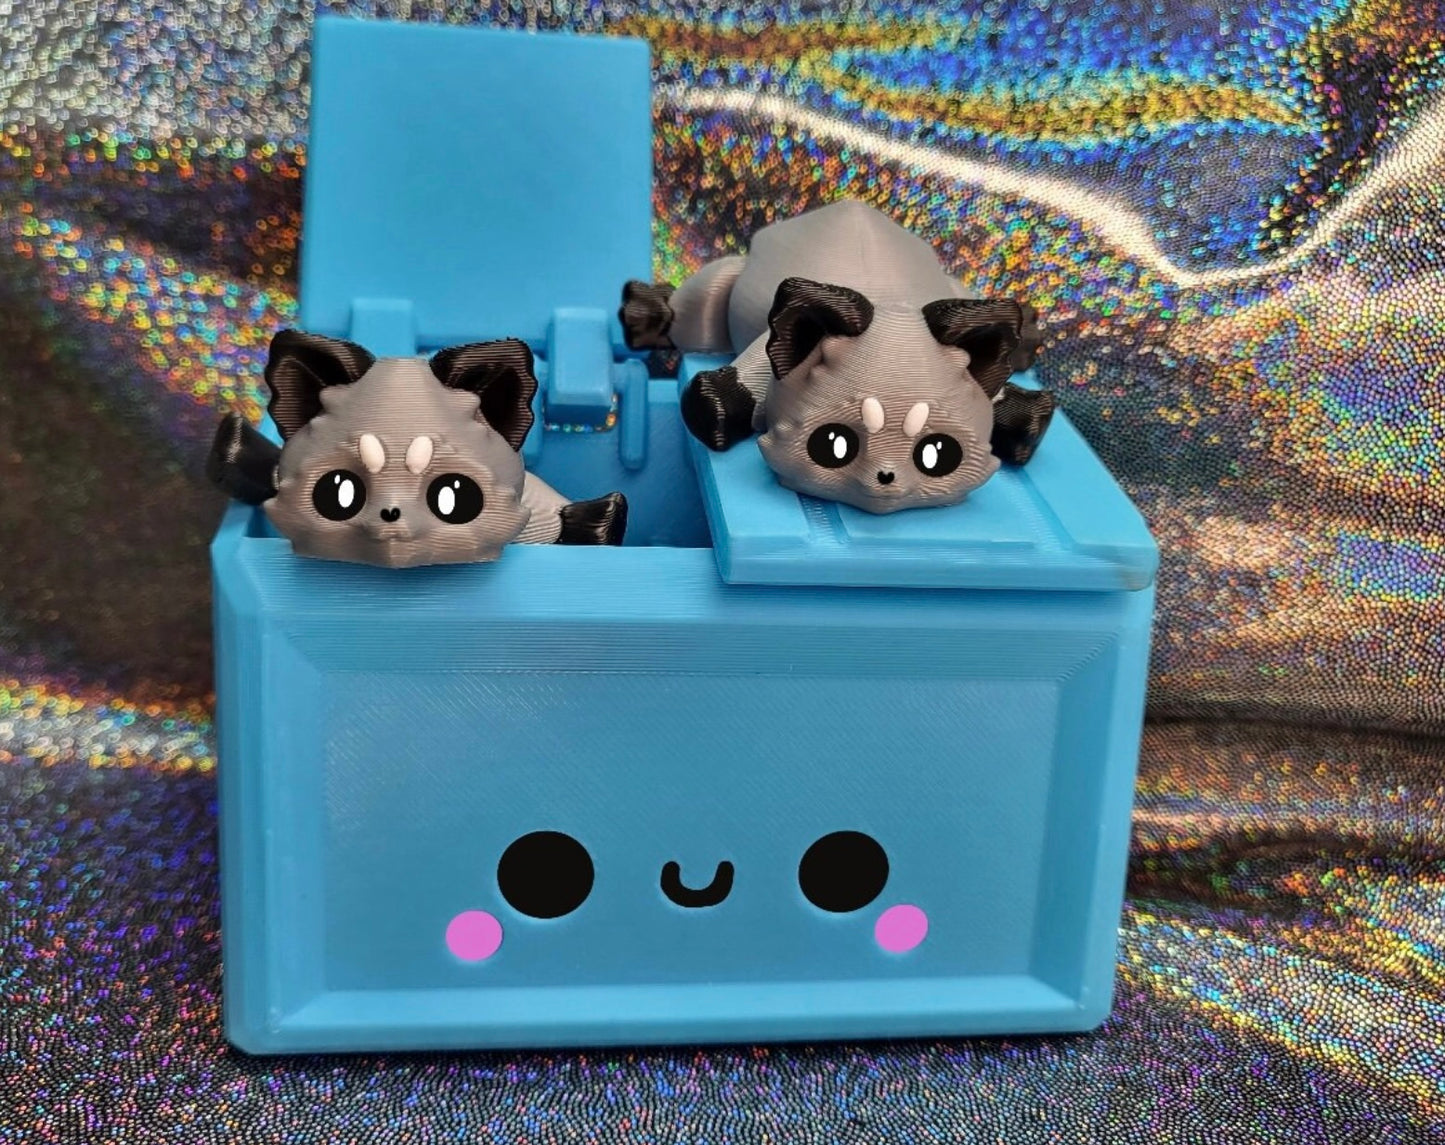 Articulated Raccoons With Dumpster. Adult Desk Toy.